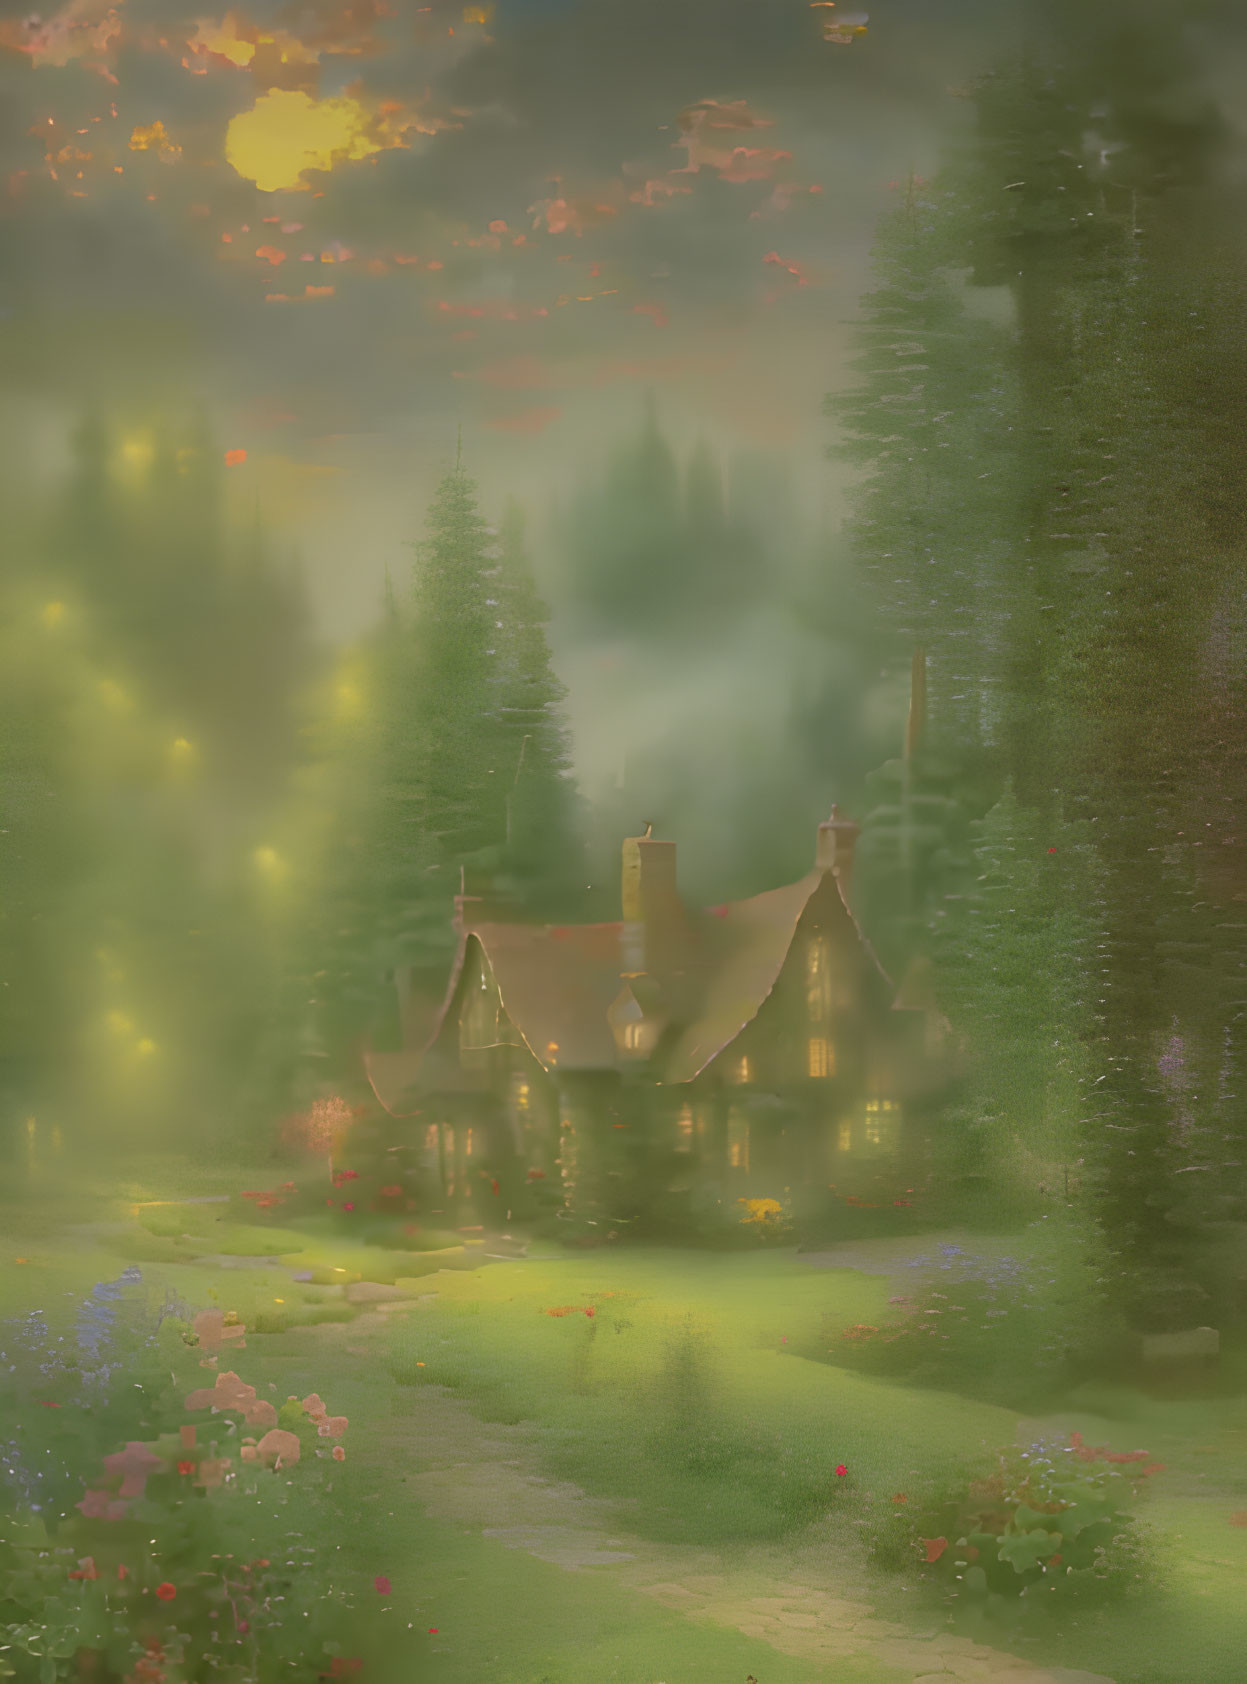 Cozy cottage with smoking chimneys in misty forest glade at sunset